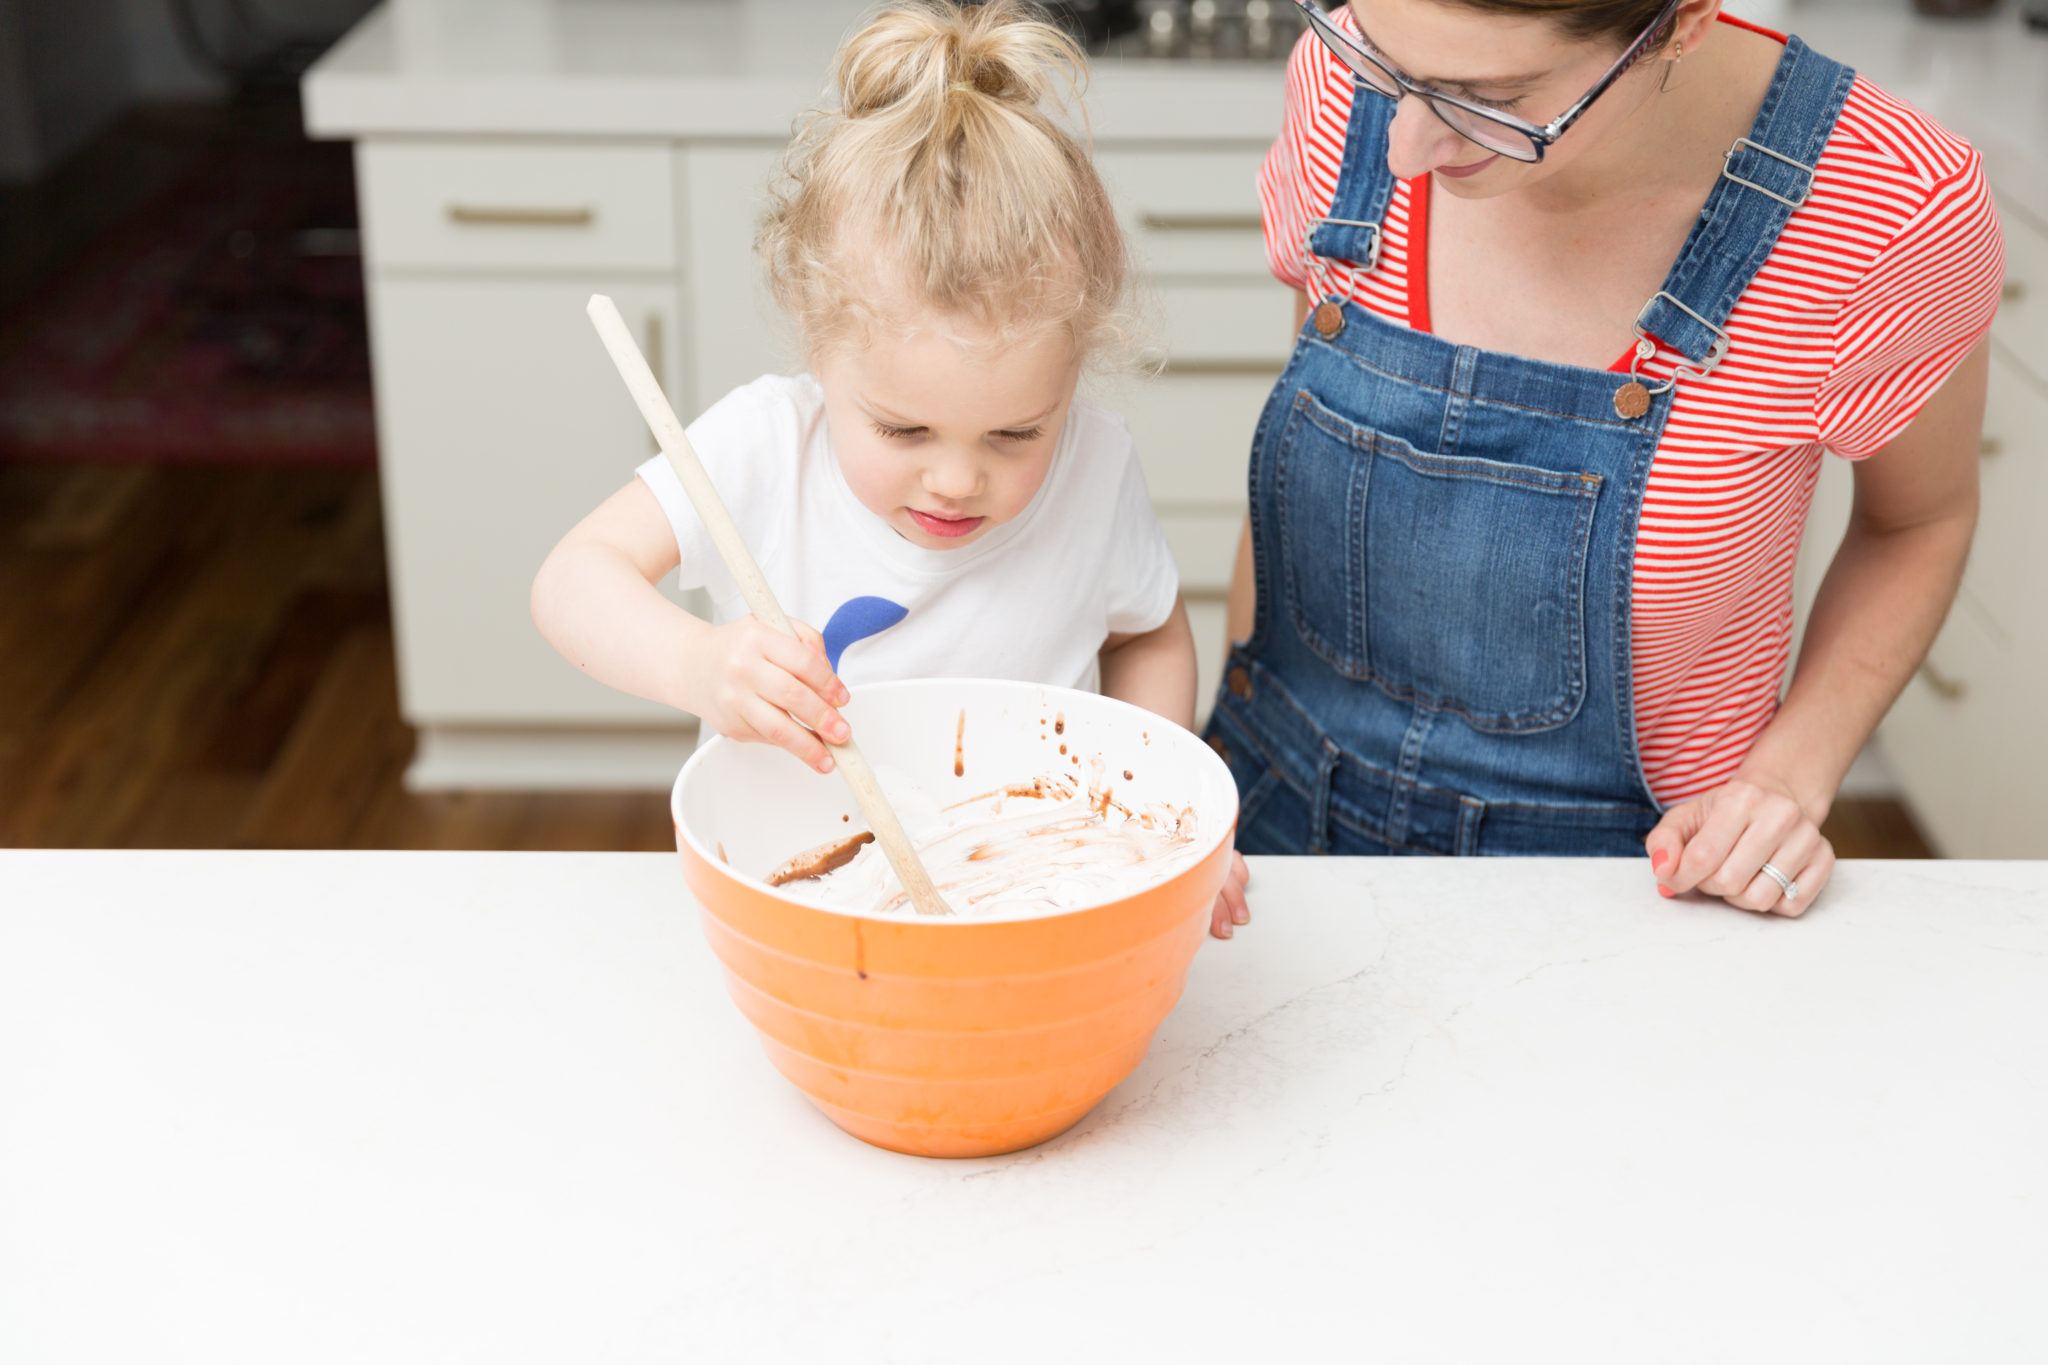 How to make dirt cups for earth day | easy desserts you can make with toddlers | how to get your toddler to help in the kitchen on allweareblog.com